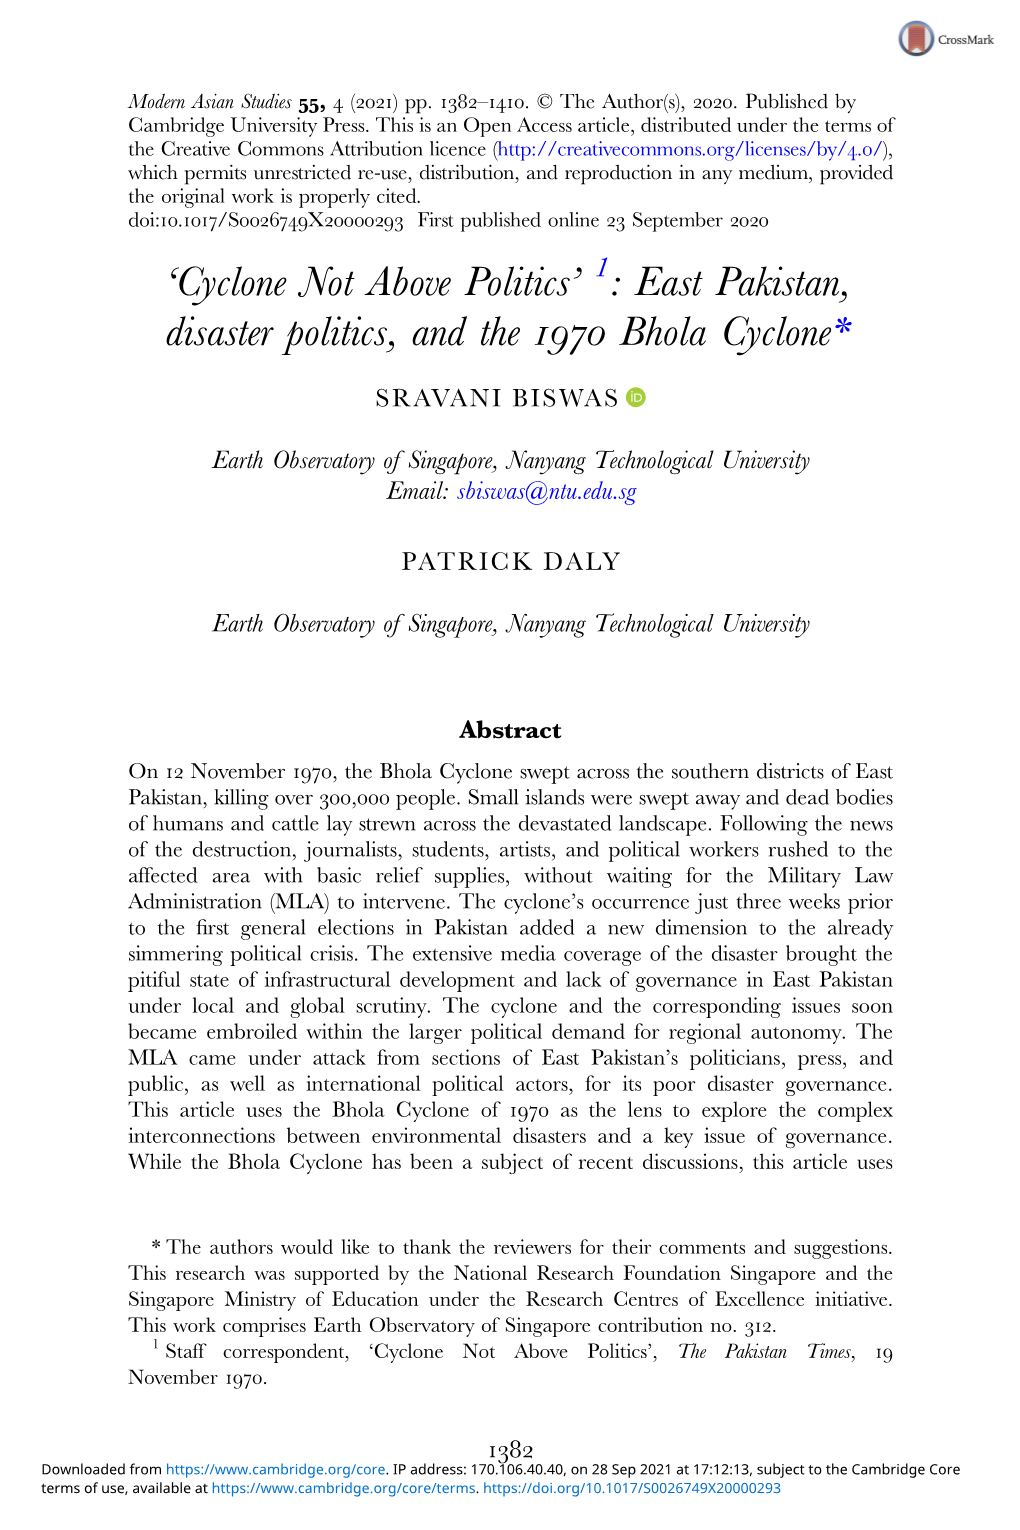 East Pakistan, Disaster Politics, and the Bhola Cyclone